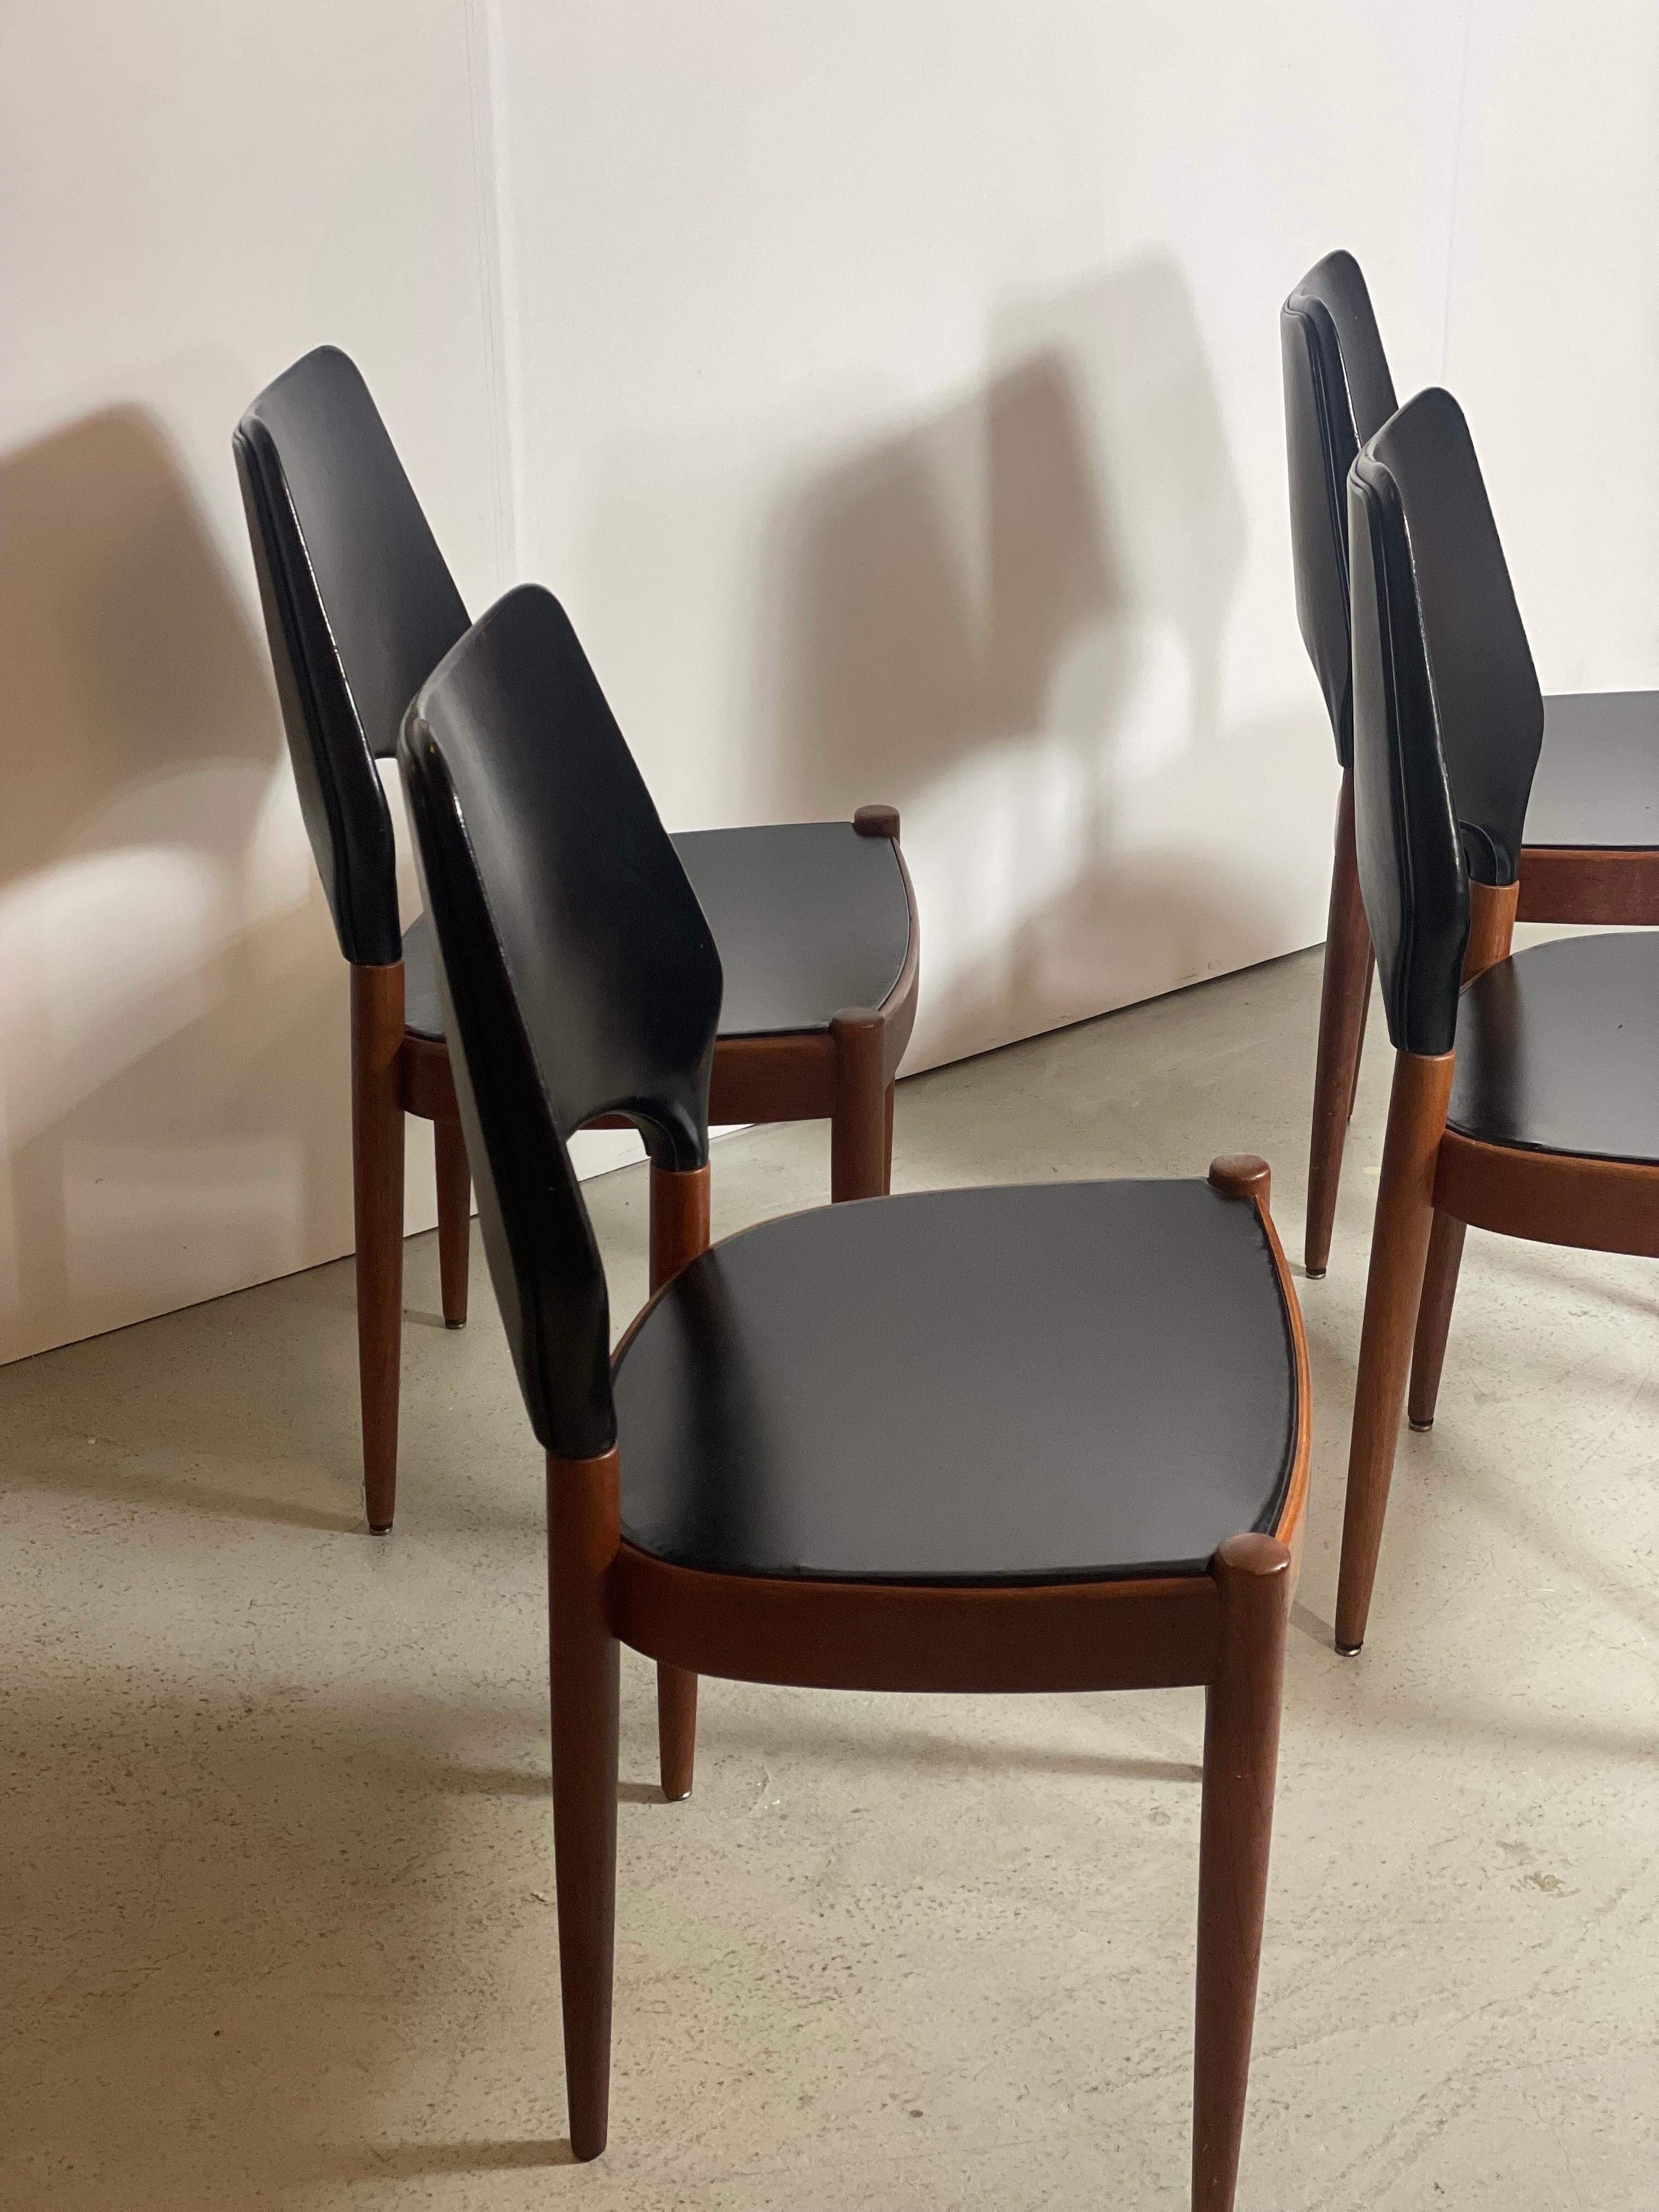 A rare set of four dining chair  designed by Arne Hovman Olsen for Mogens Kold Møbelfabrik. Made in Denmark in the 1950s. The construction and design of these chairs is very solid and offer comfortable seating. 

Danish furniture designer Arne